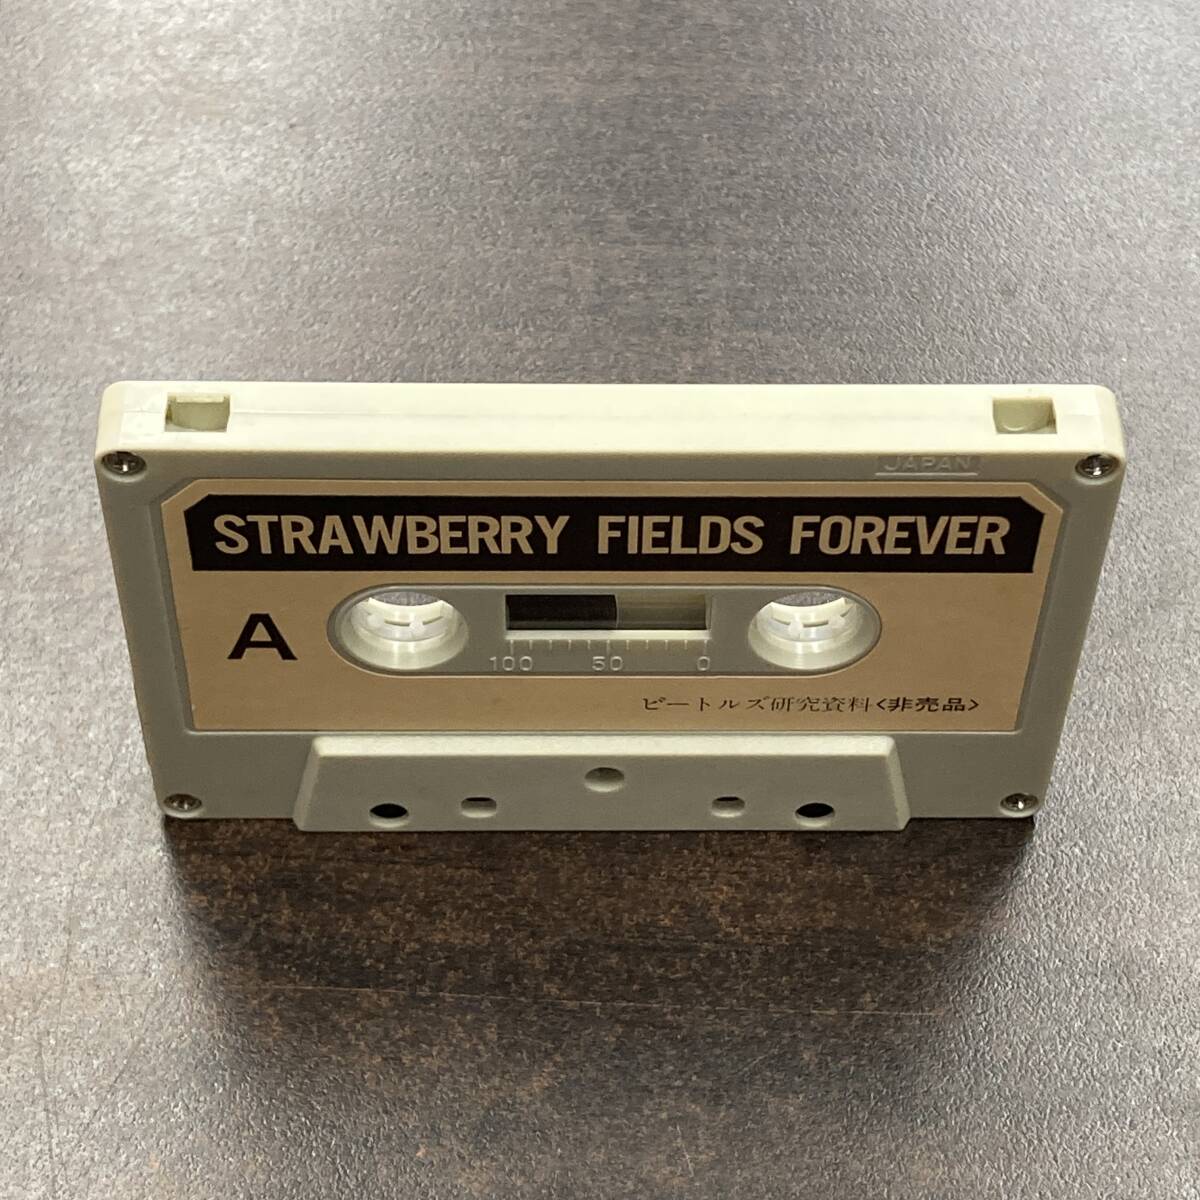 1222M ザ・ビートルズ 研究資料 STRAWBERRY FIELDS FOREVER カセットテープ / THE BEATLES Research materials Cassette Tapeの画像2